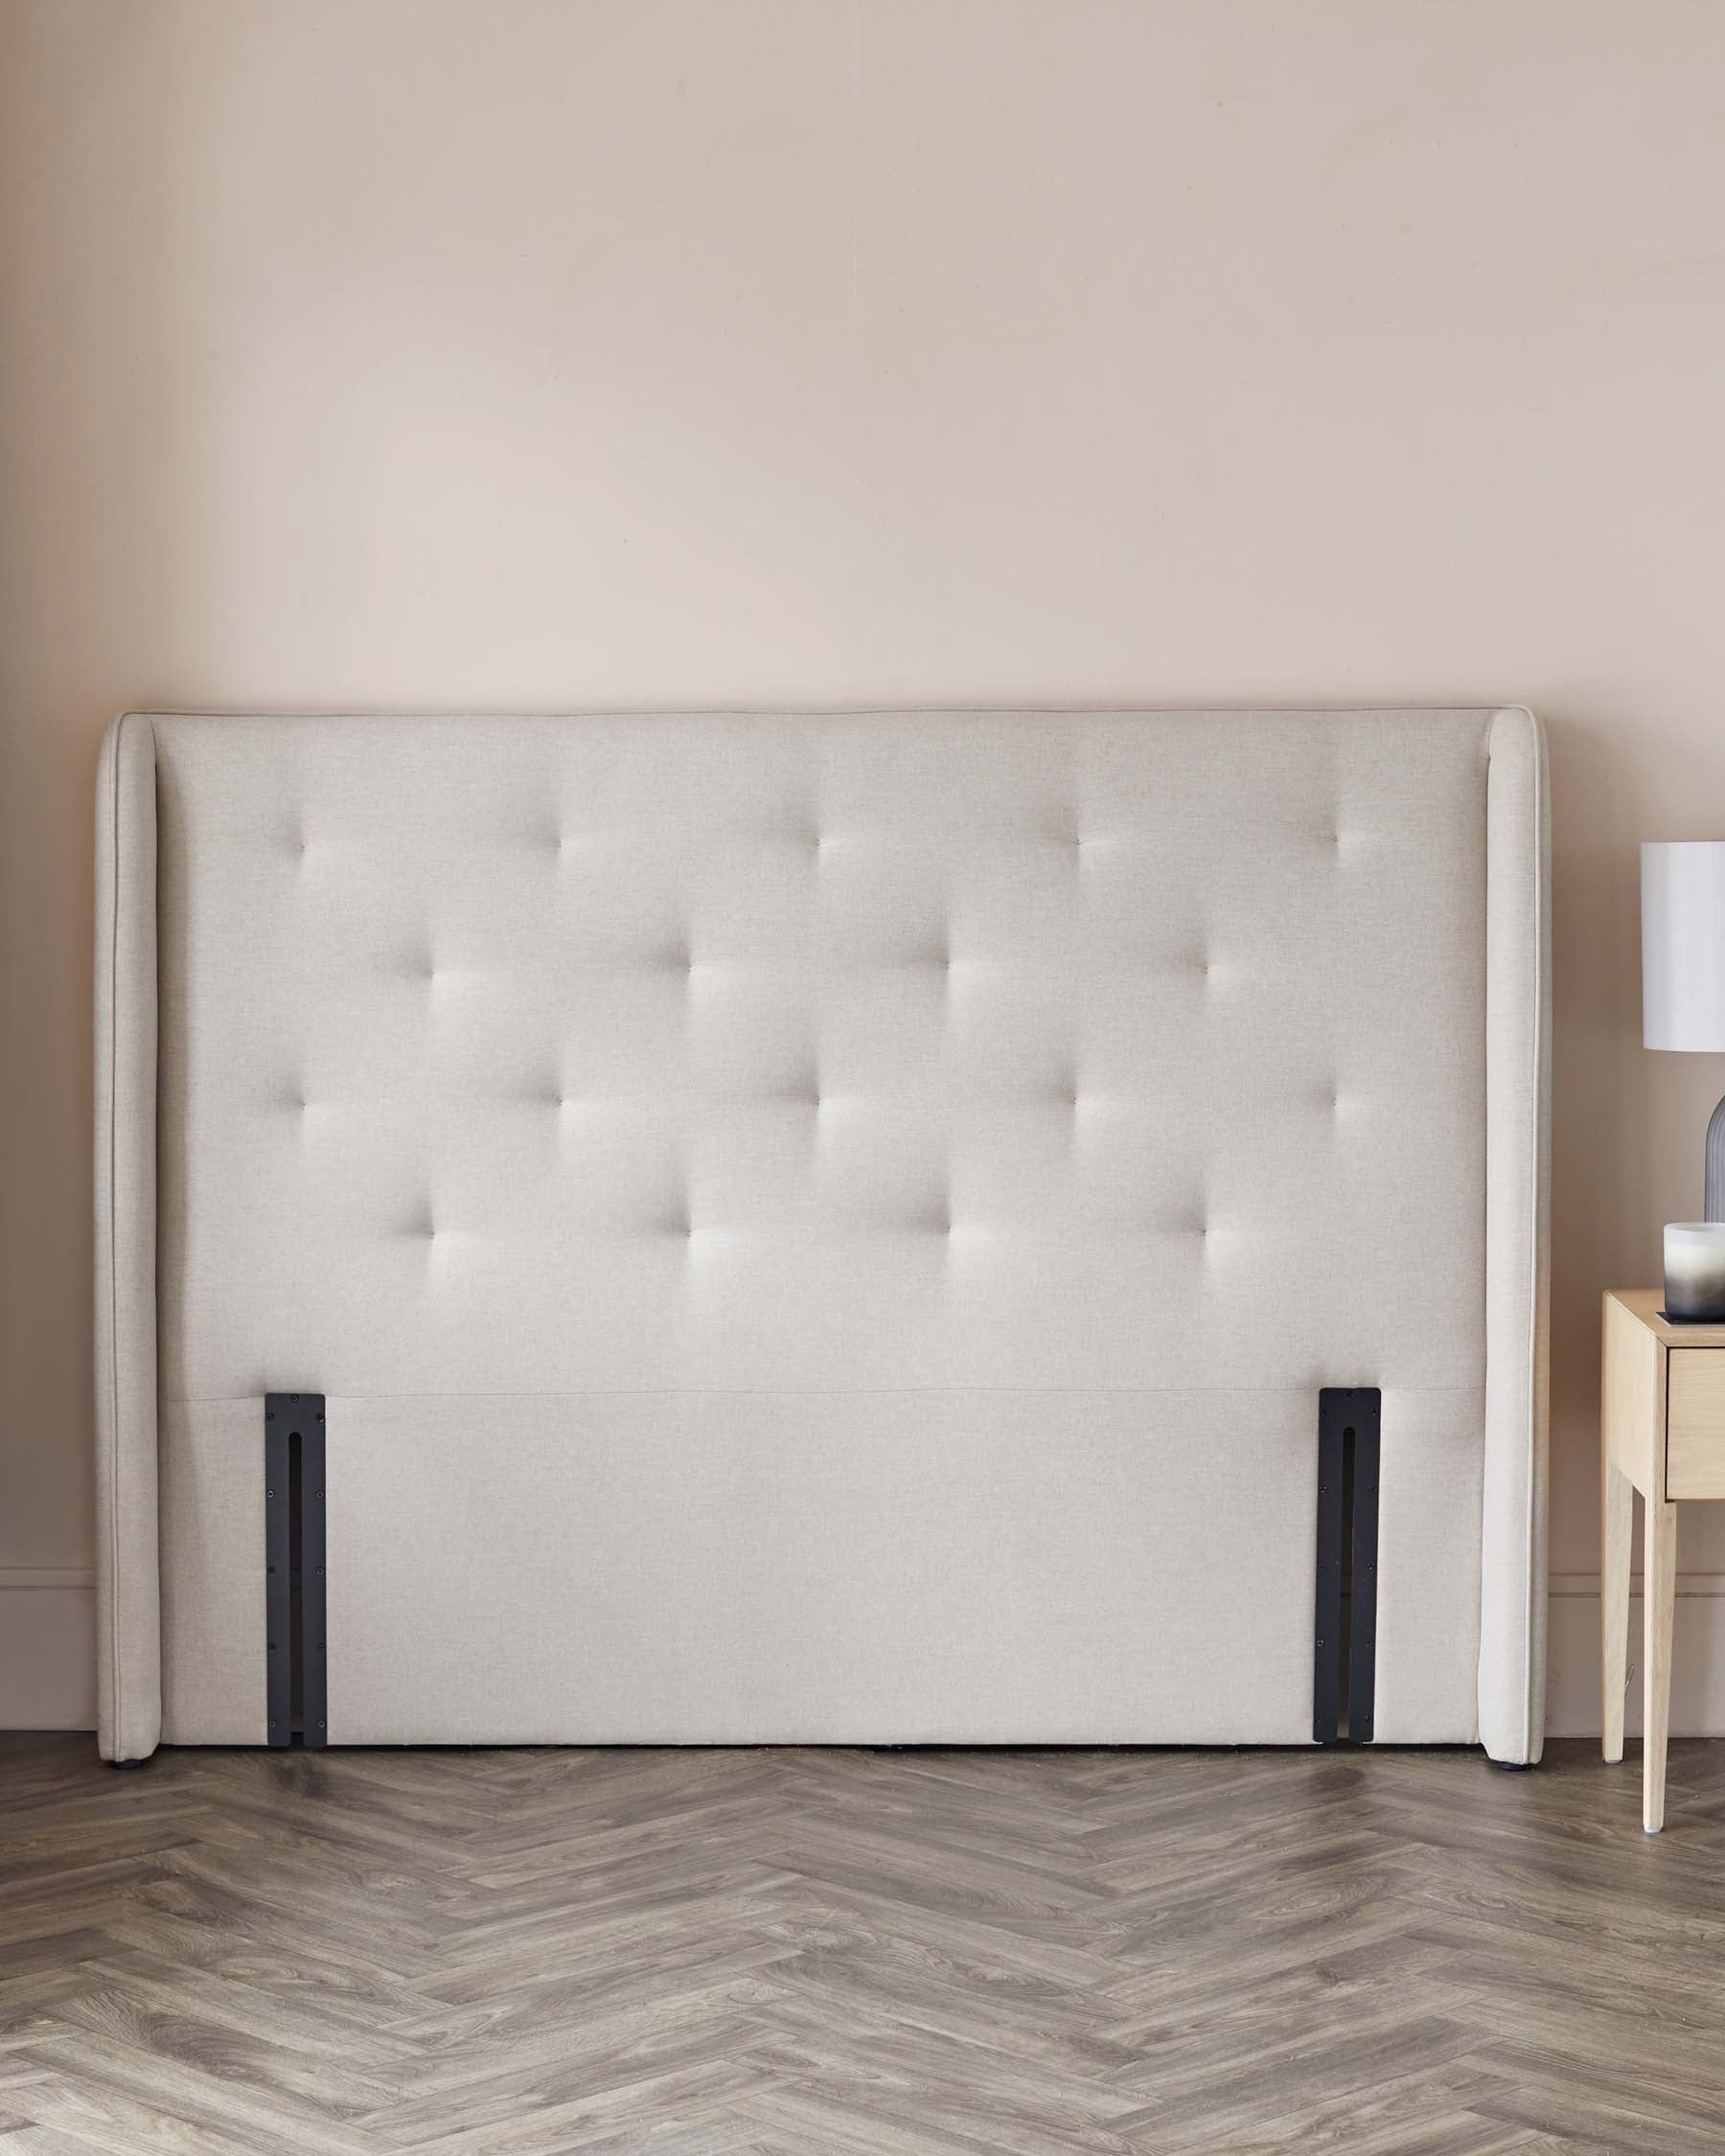 Beige Headboards: Tufted, Fabric, and Other Styles